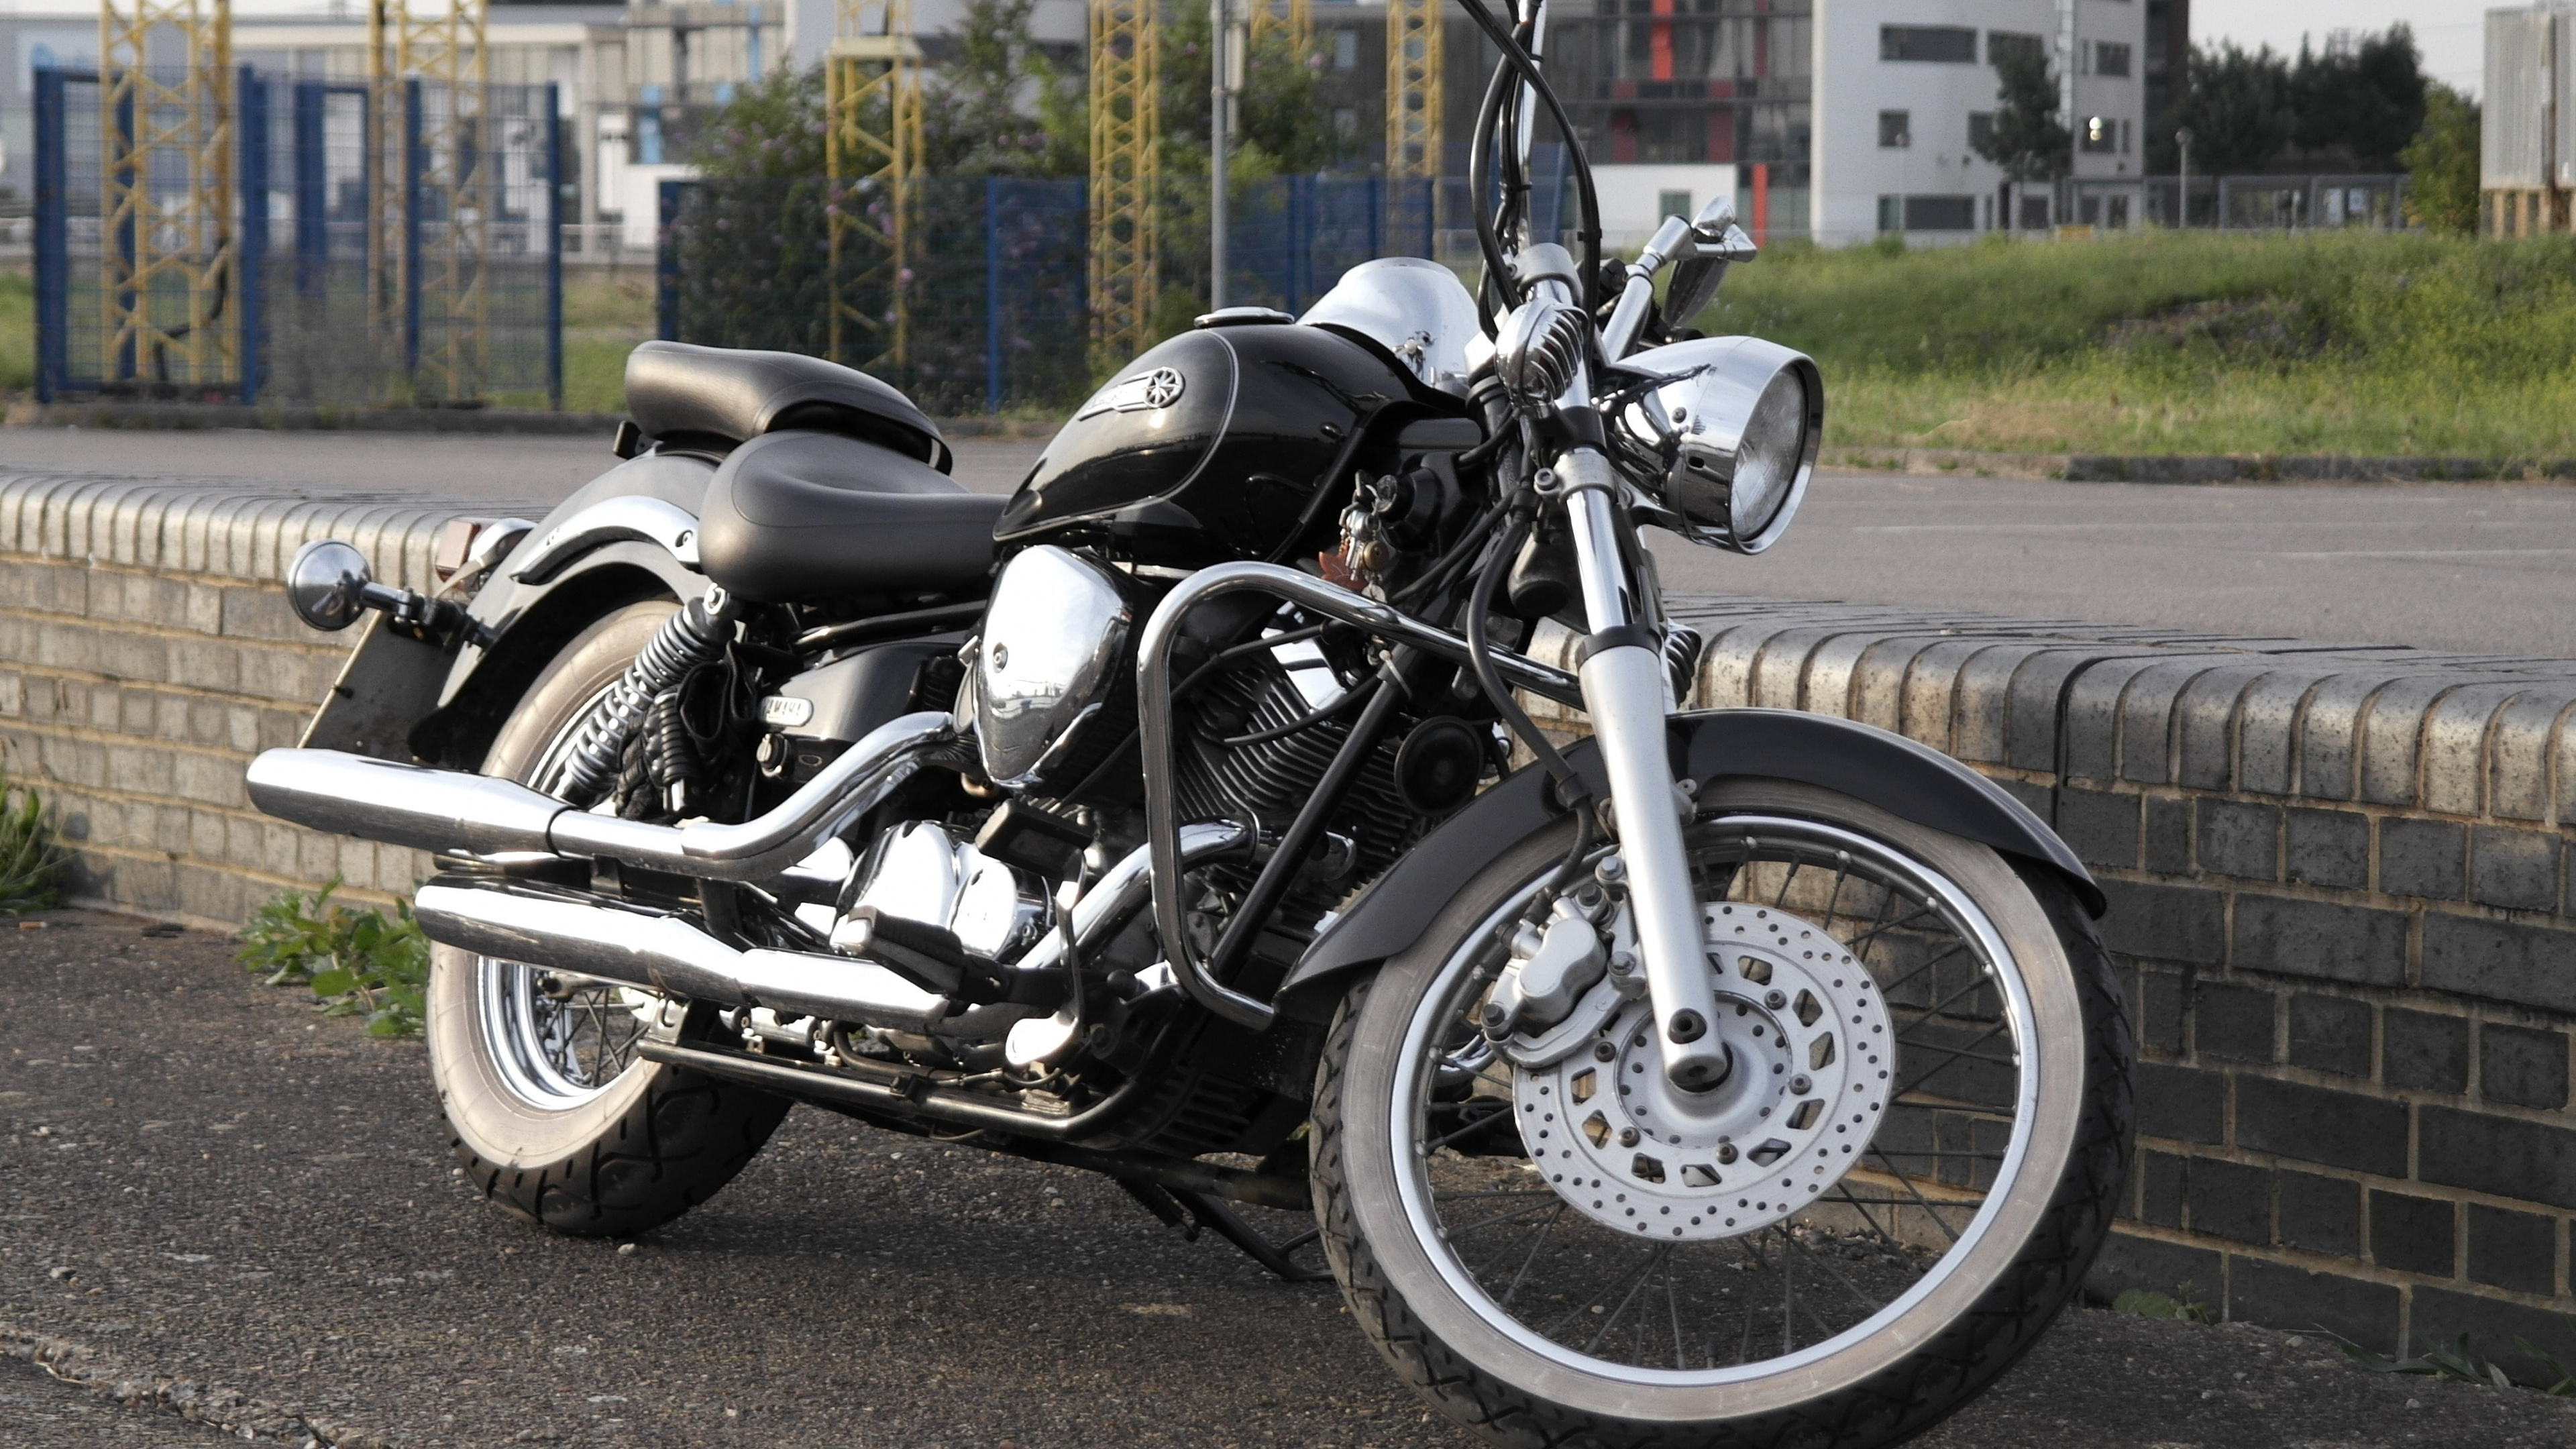 Black and Silver Cruiser Motorcycle on Road During Daytime. Wallpaper in 3840x2160 Resolution